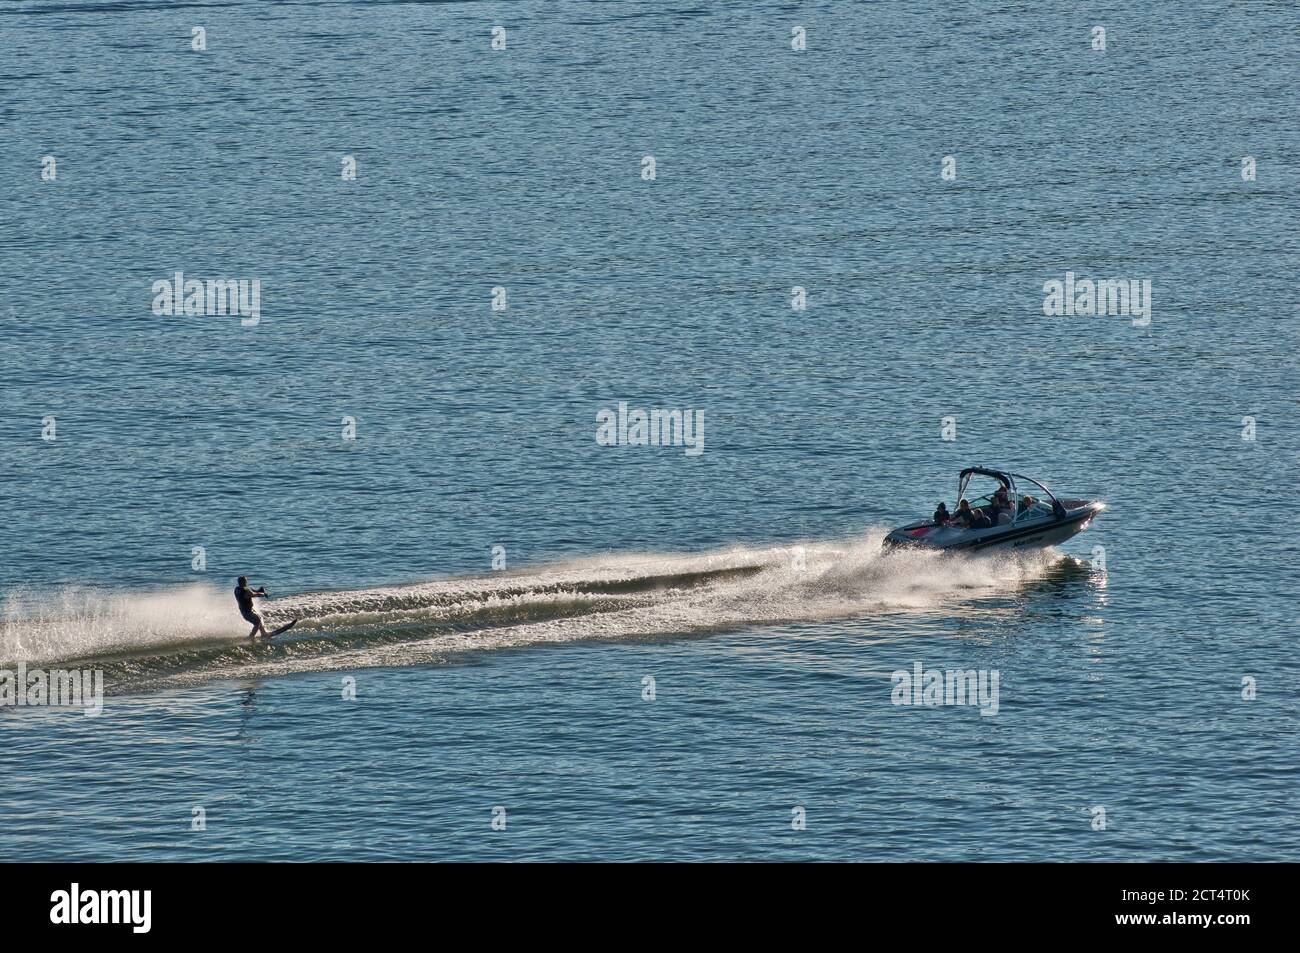 Water skier at Pineview Reservoir, artificial lake in Ogden Valley, Wasatch Mountains, Utah, USA Stock Photo